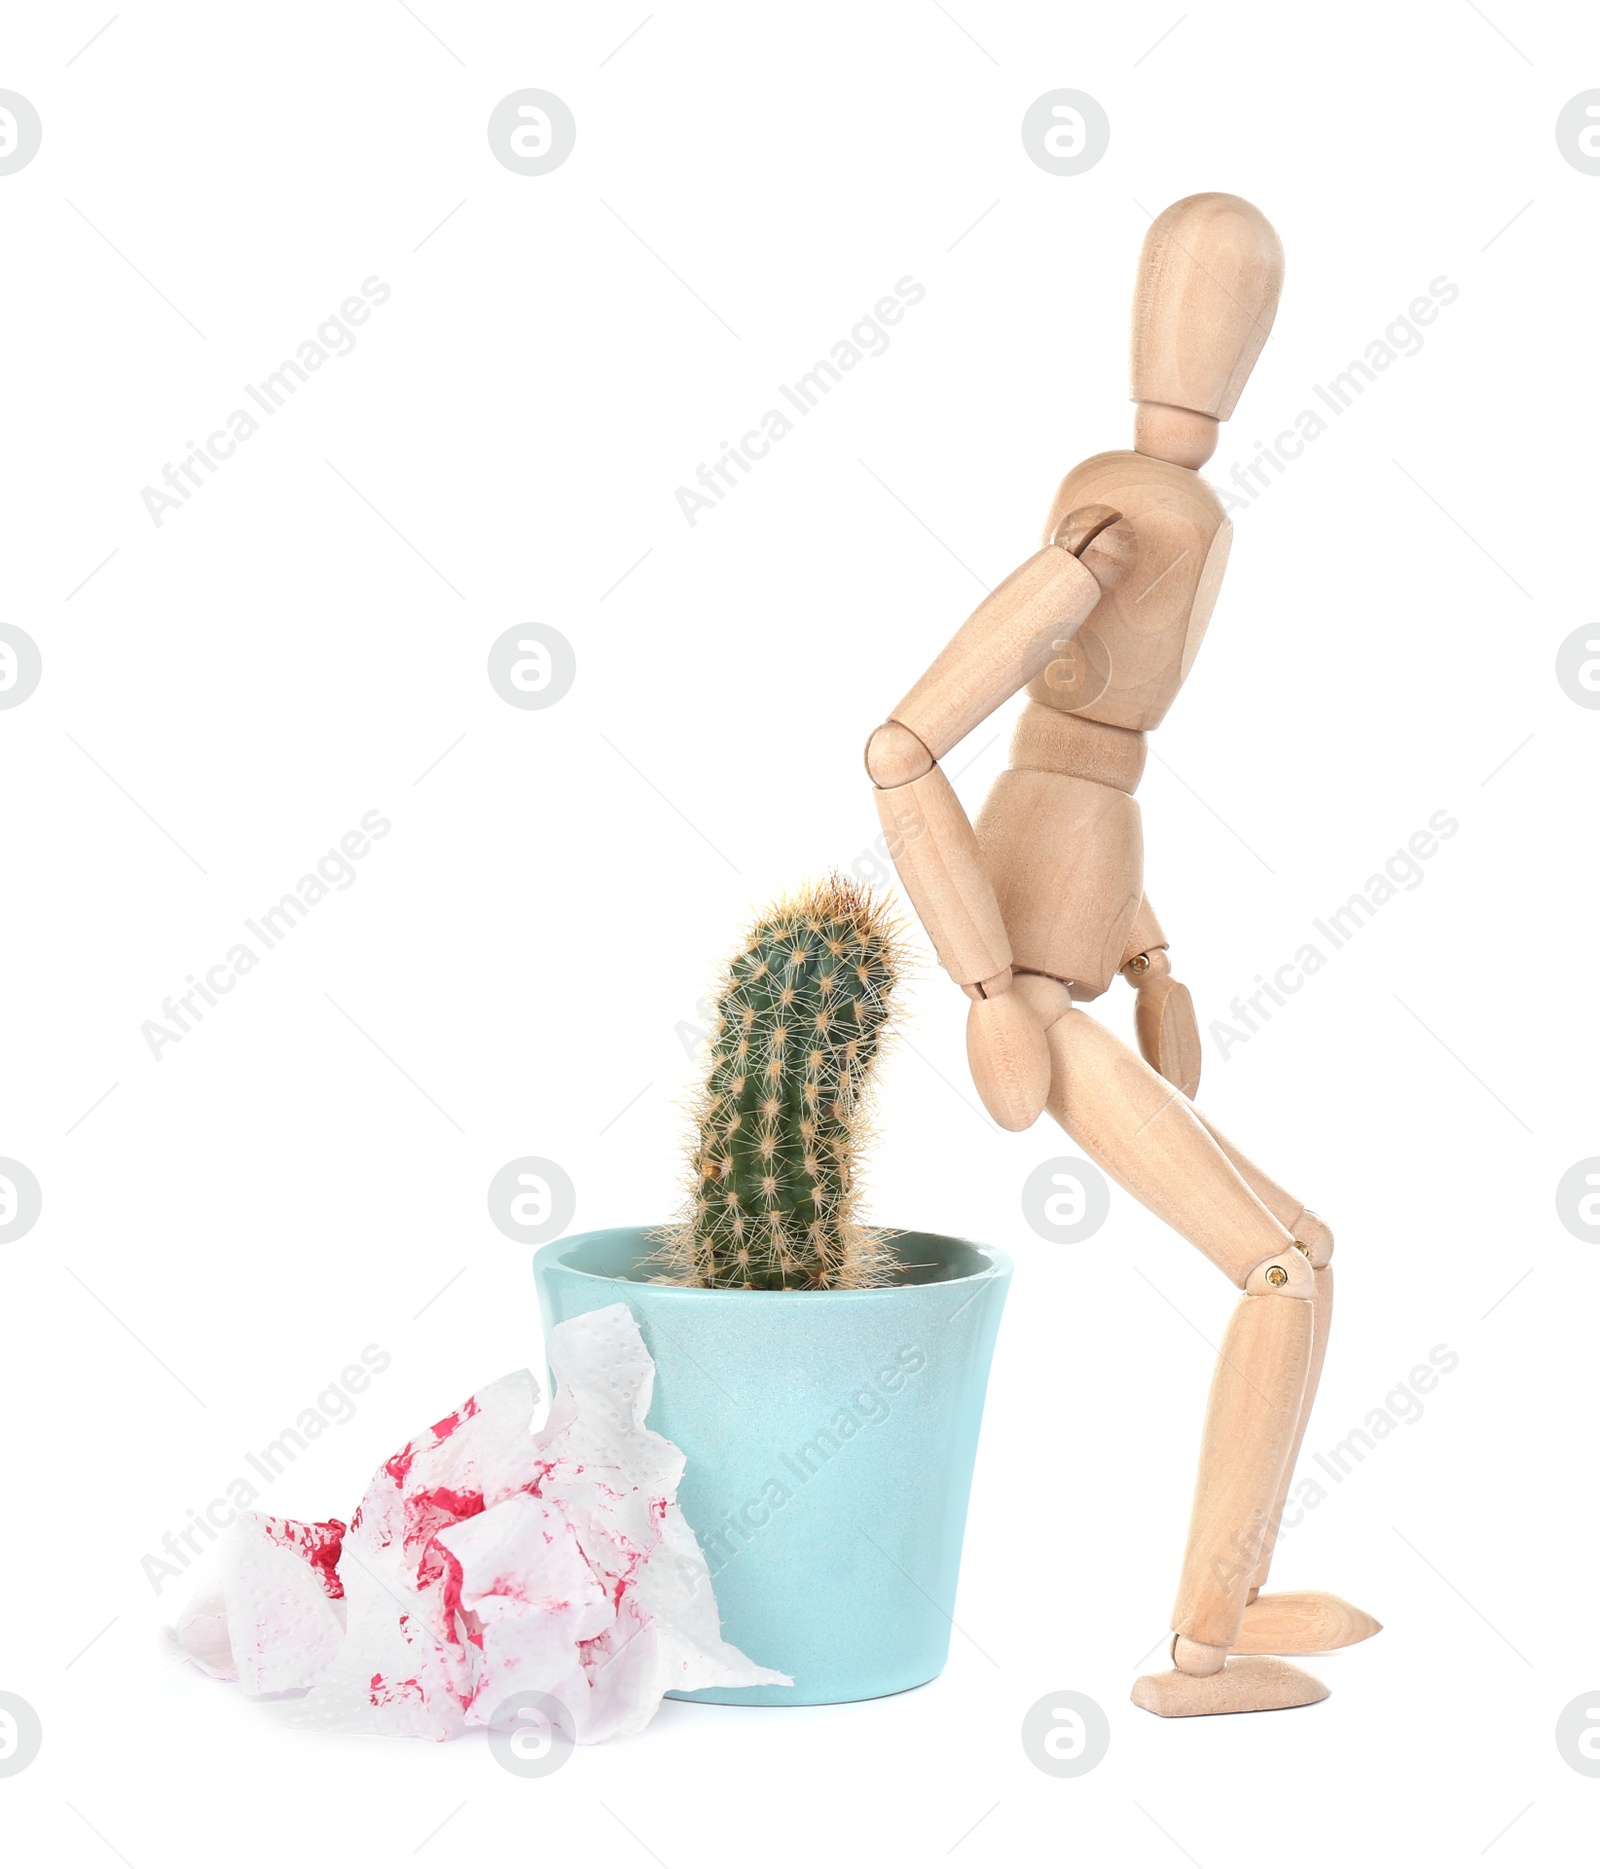 Photo of Wooden human figure, cactus and sheets of toilet paper with blood on white background. Hemorrhoid problems